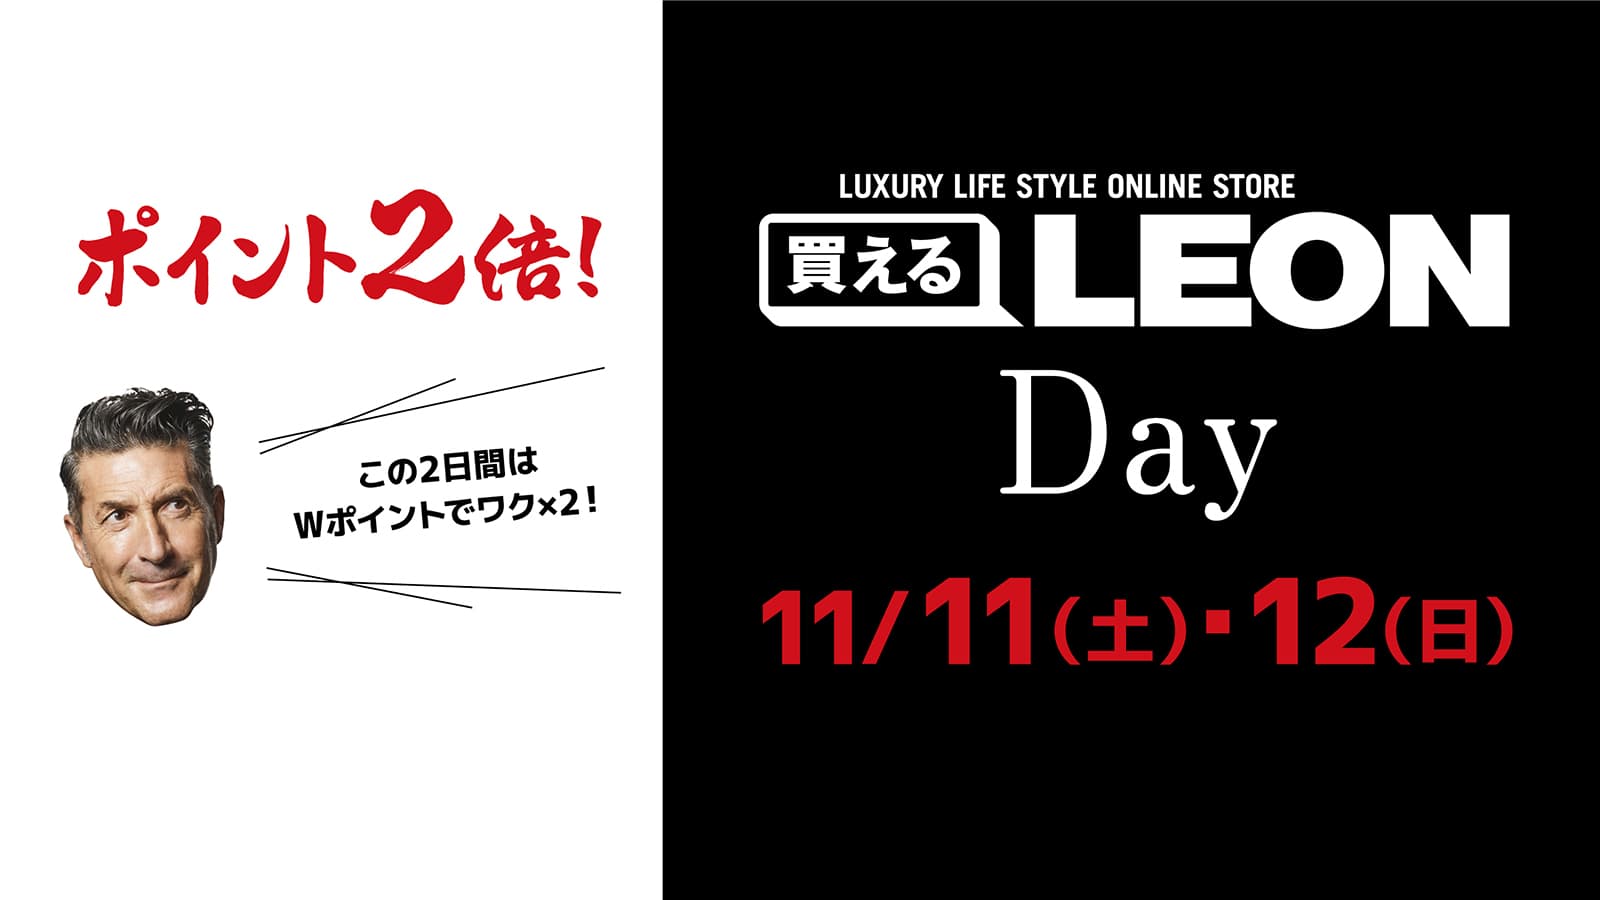 For 2 days only, double points campaign for all members! Additionally, new members will receive a ¥1,000 OFF coupon!